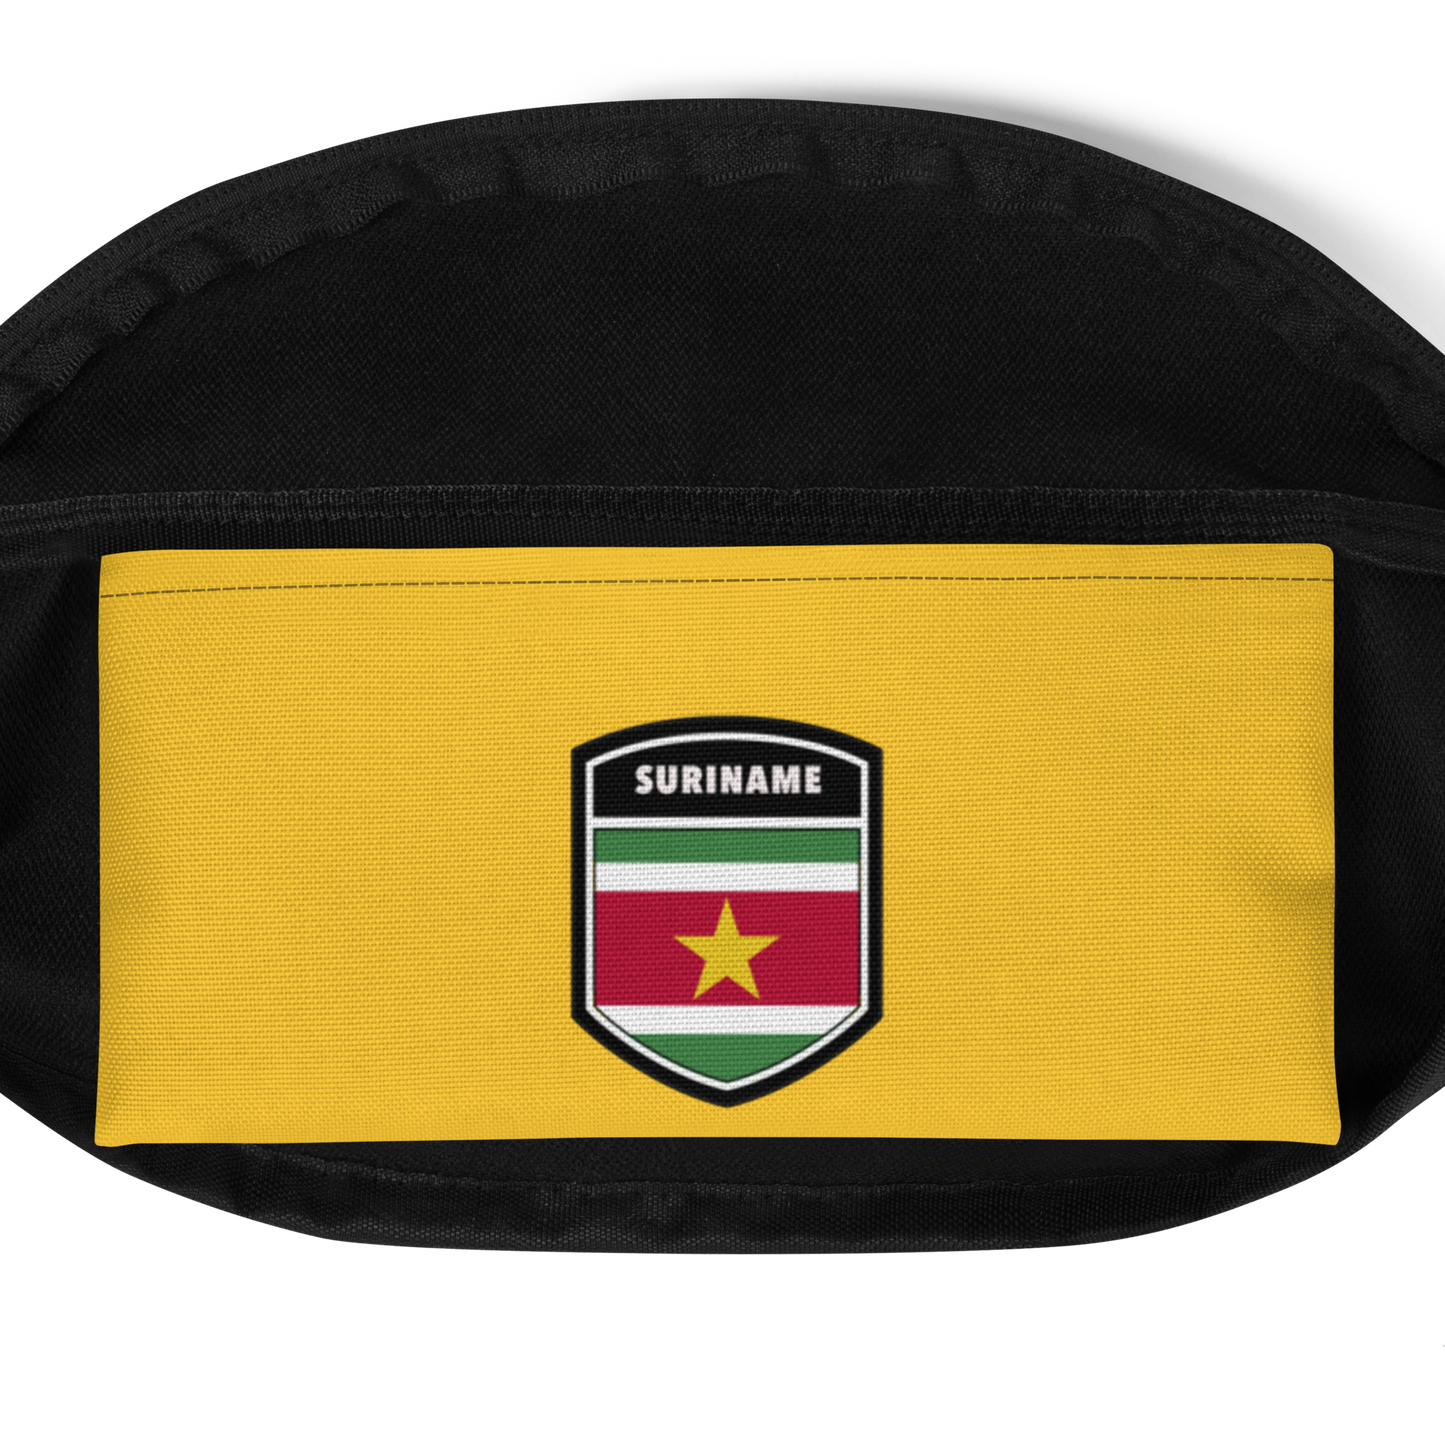 I Am Rooting: Suriname Fanny Pack